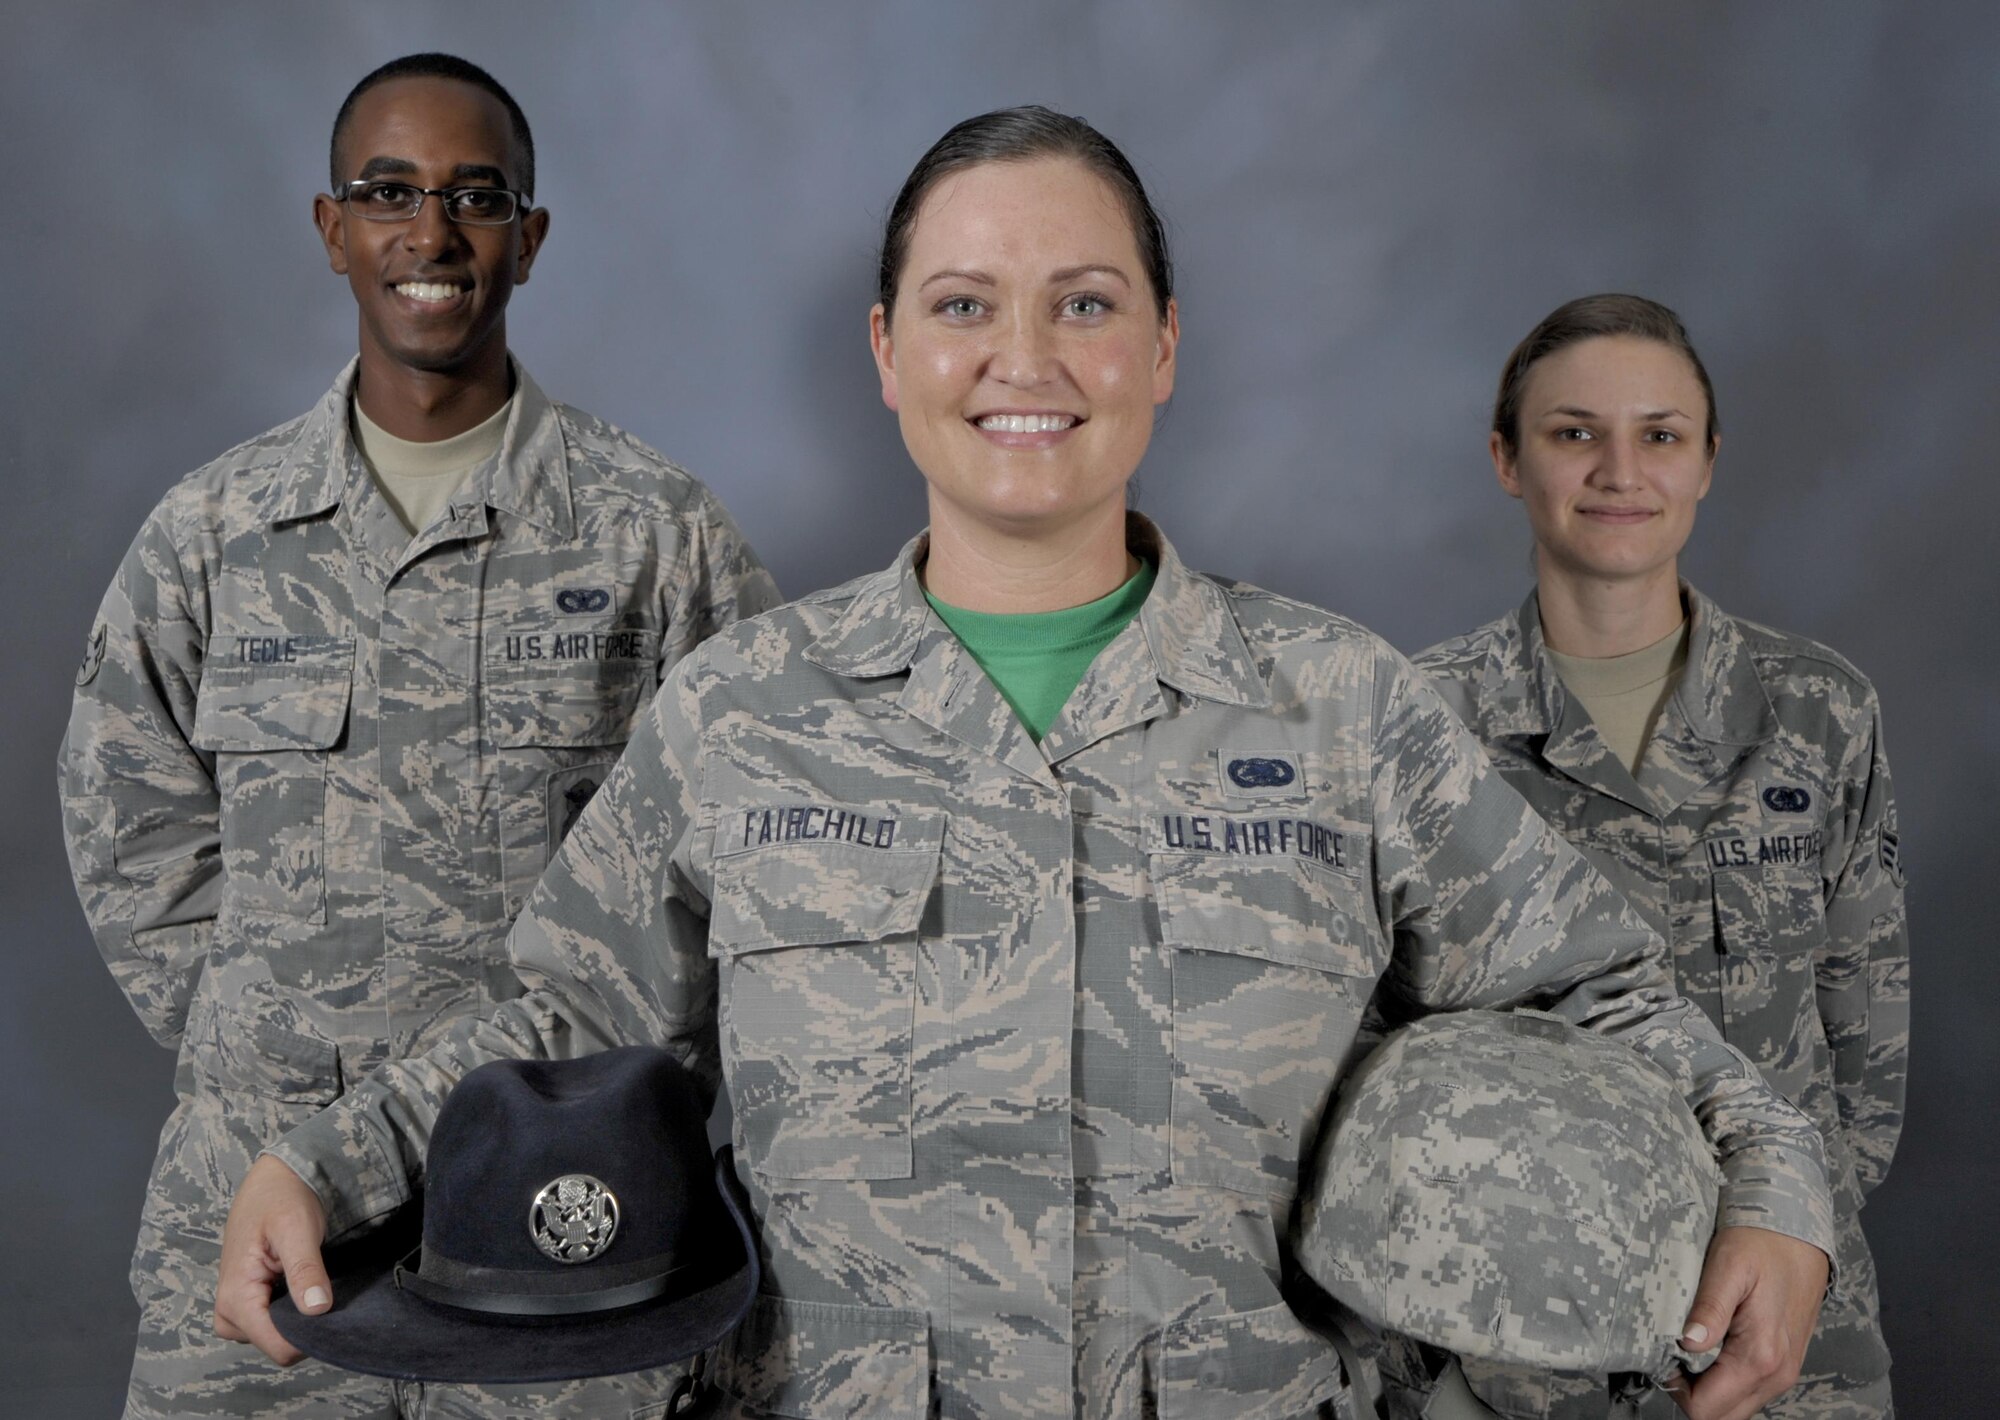 Staff Sgt. Jessica Fairchild (center), a former military training instructor and currently an individual protective equipment supervisor assigned to the 6th Logistics Readiness Squadron, pauses for a photo with Airman 1st Class Zenawi Tecle (left), a former trainee of Fairchild and now an entry controller with the 6th Security Forces Squadron, and Senior Airman Kristin Weiland (right), an individual protective equipment technician with the 6th LRS, Feb. 24, 2017, at MacDill Air Force Base, Fla. Fairchild served four years as an MTI applying professionalism and dedication to train thousands of people and groomed them into Airmen before returning to her current career field. (U.S. Air Force photo/Airman 1st Class Mariette Adams)